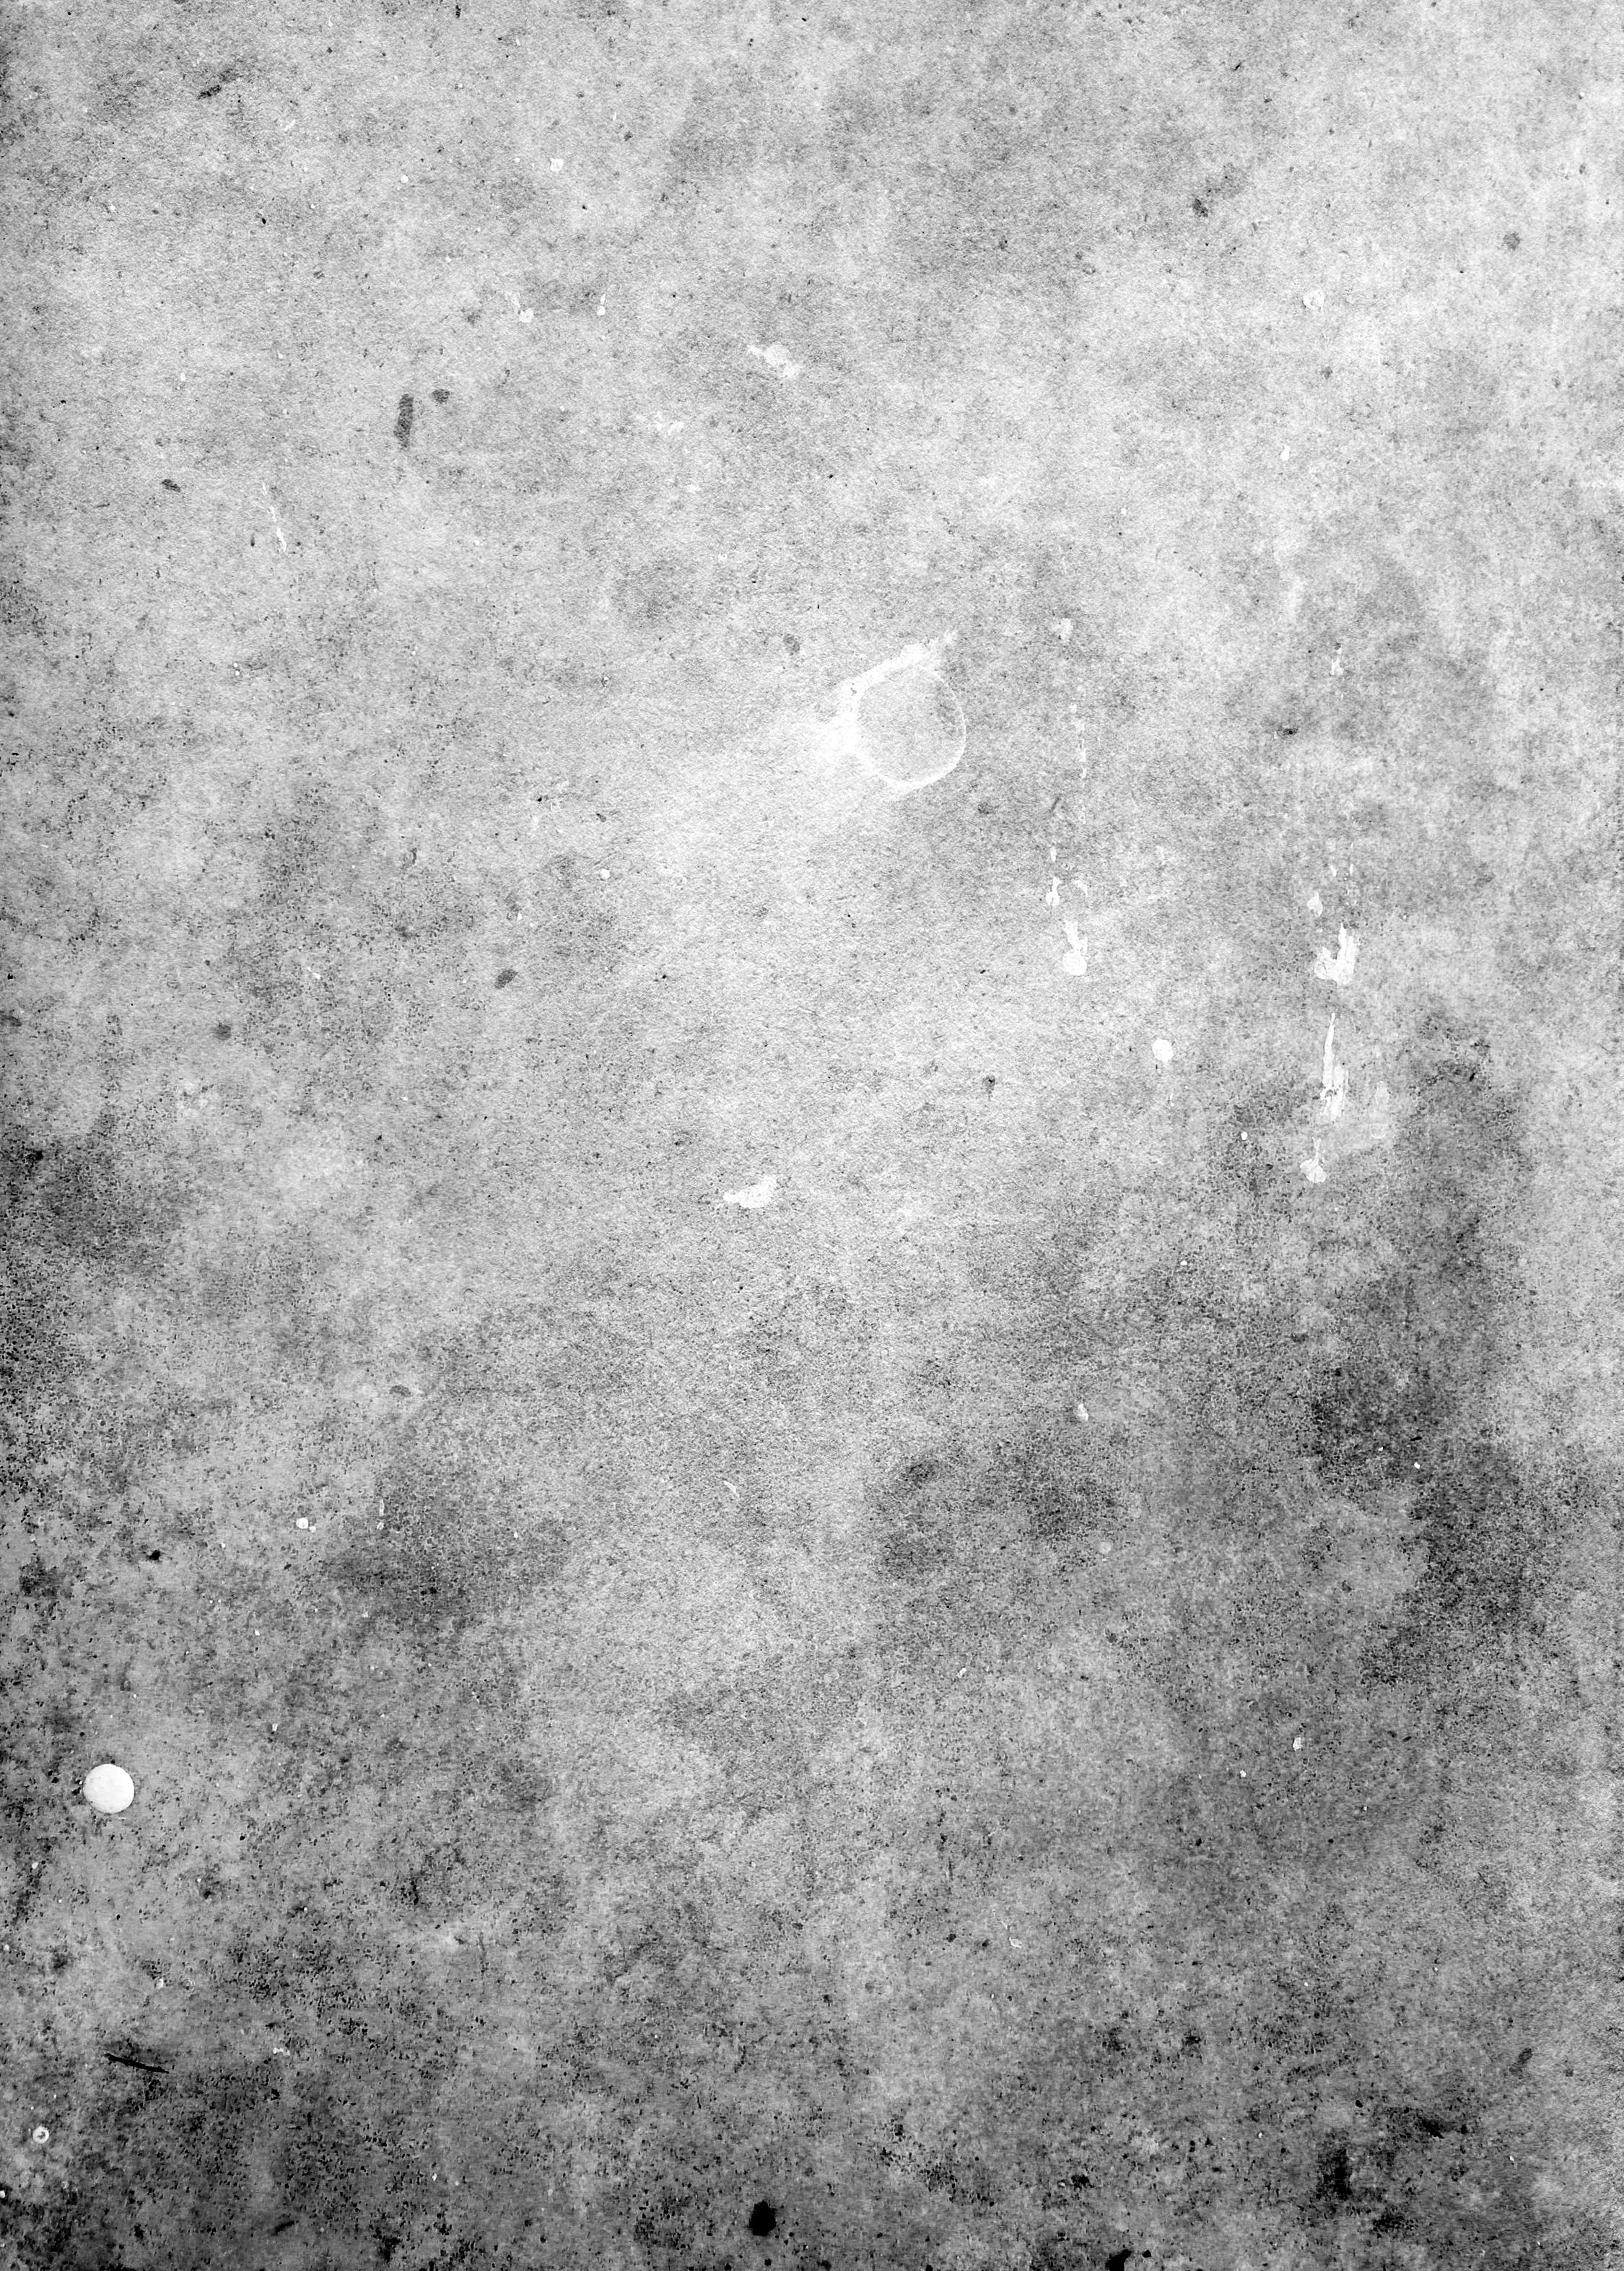 High Contrast Black And White Grunge Texture Hd Wallpaper Backgrounds Download